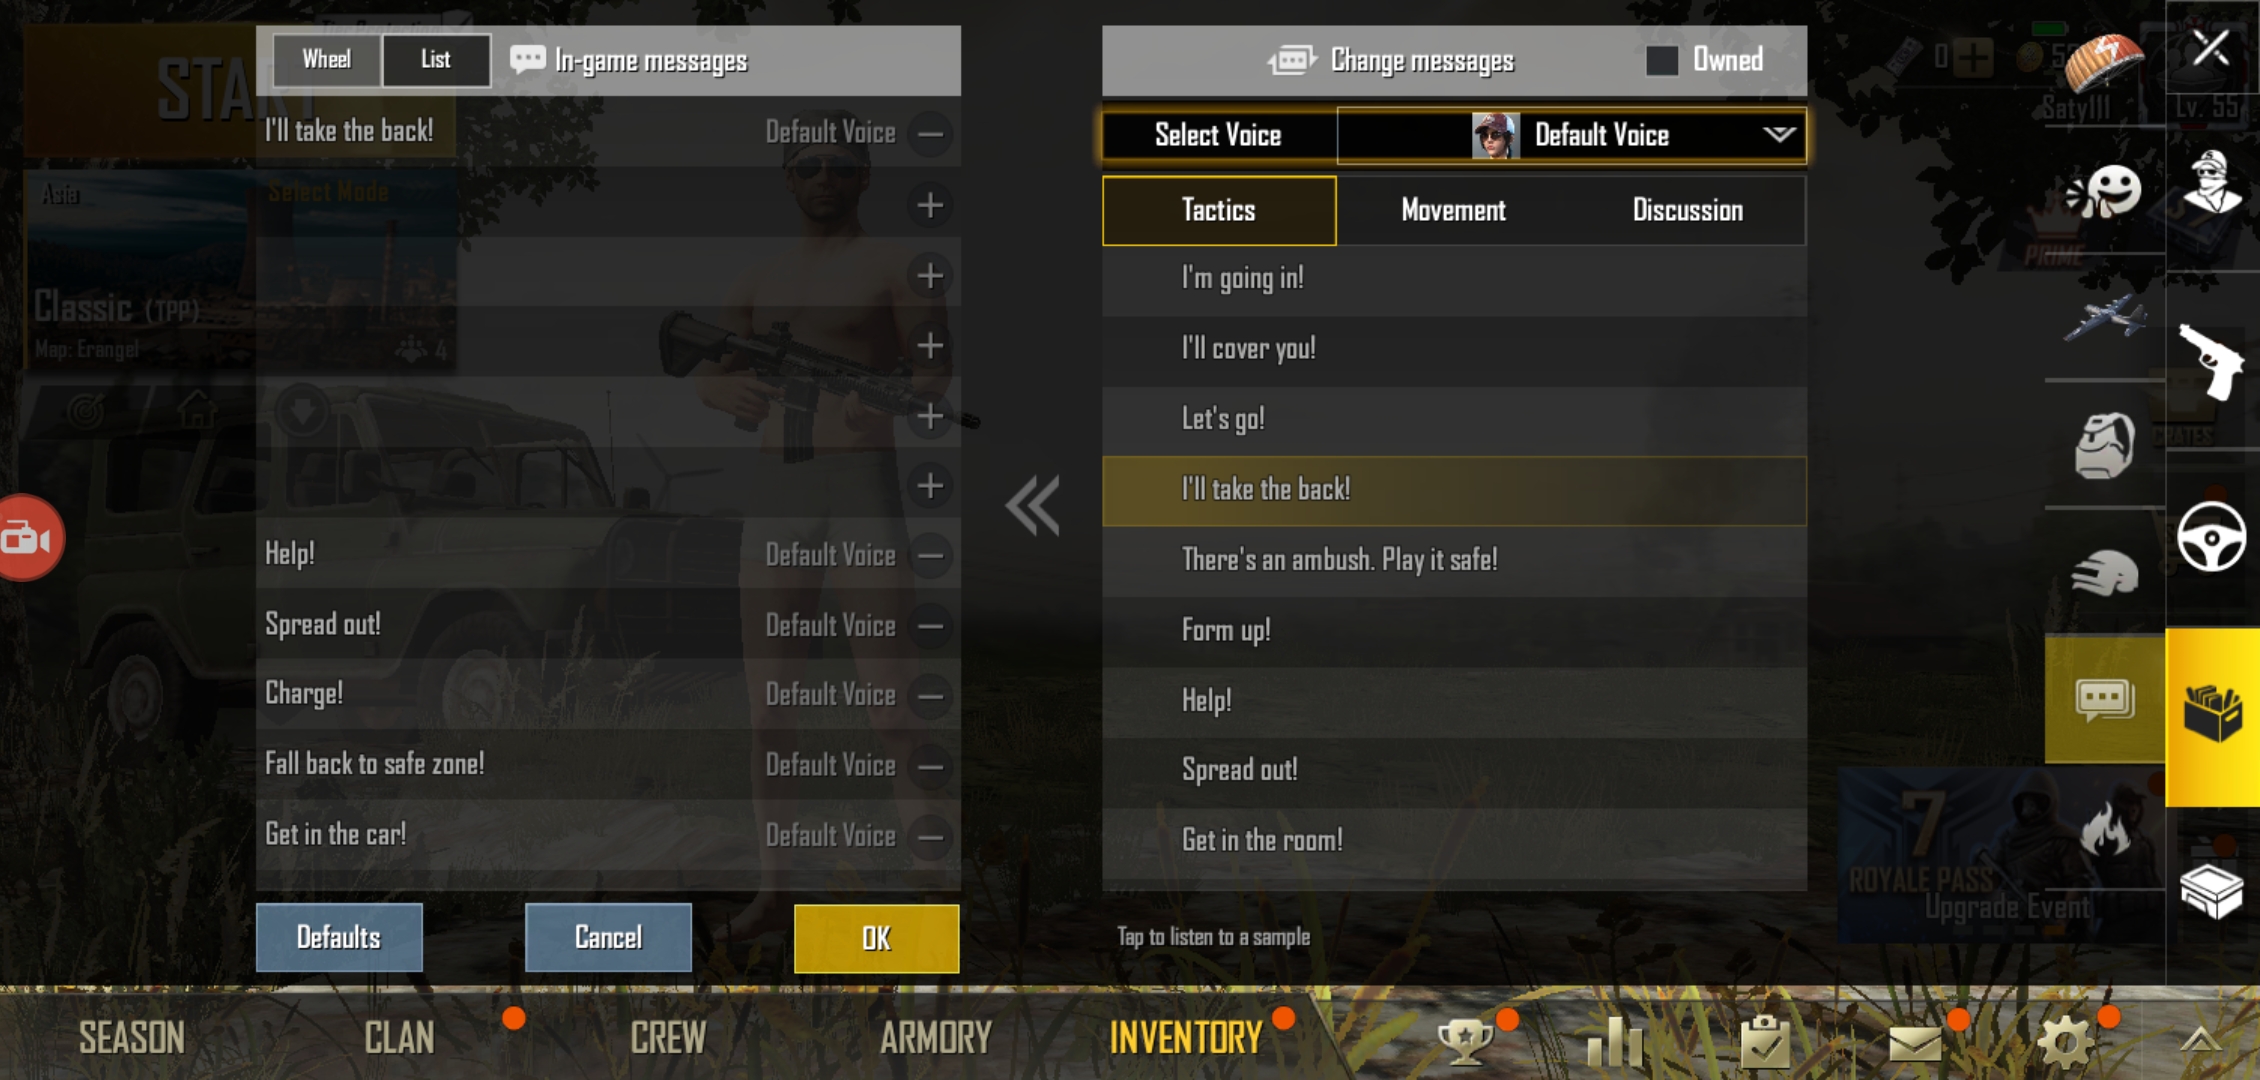 How To Get More Voice Commands In PUBG Mobile